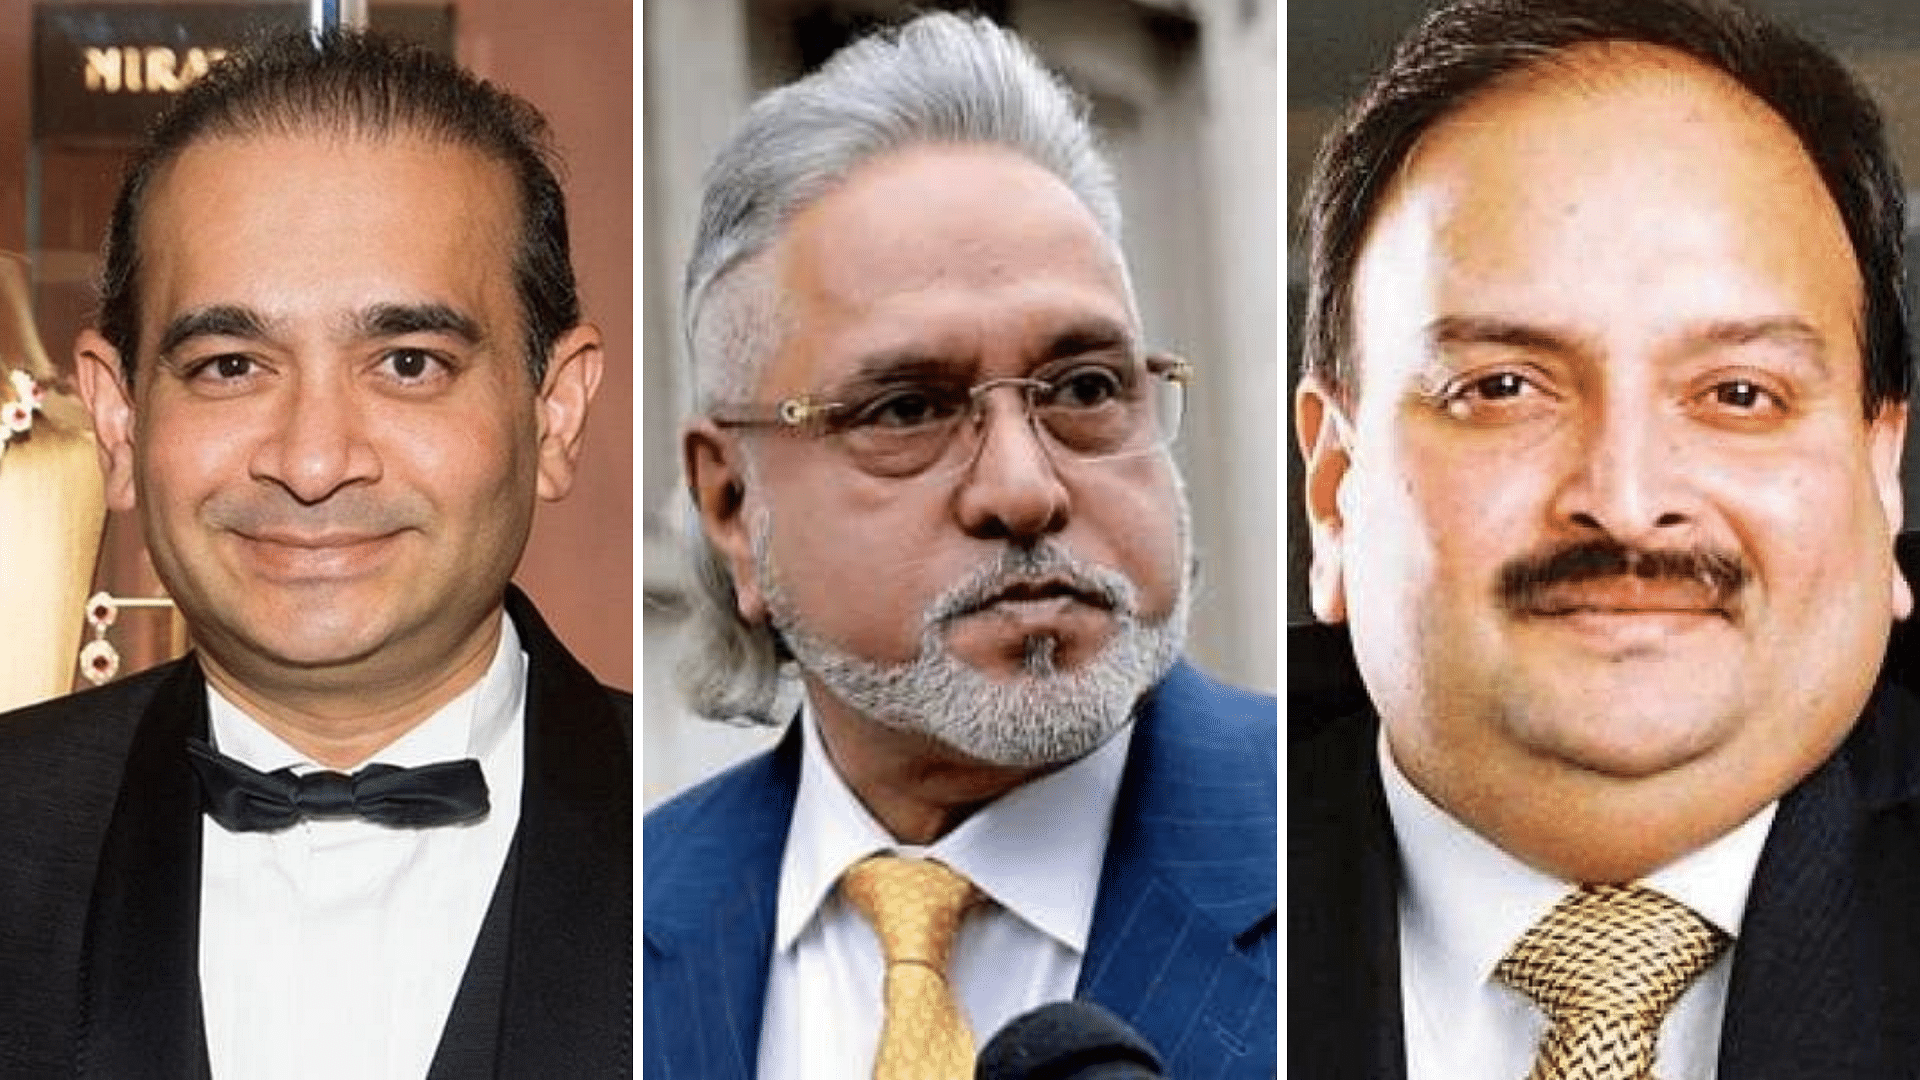 <div class="paragraphs"><p>Banks have recovered Rs 13,000 crore from the assets of fugitives (L-R) Nirav Modi, Vijay Mallya, and Mehul Choksi.</p></div>